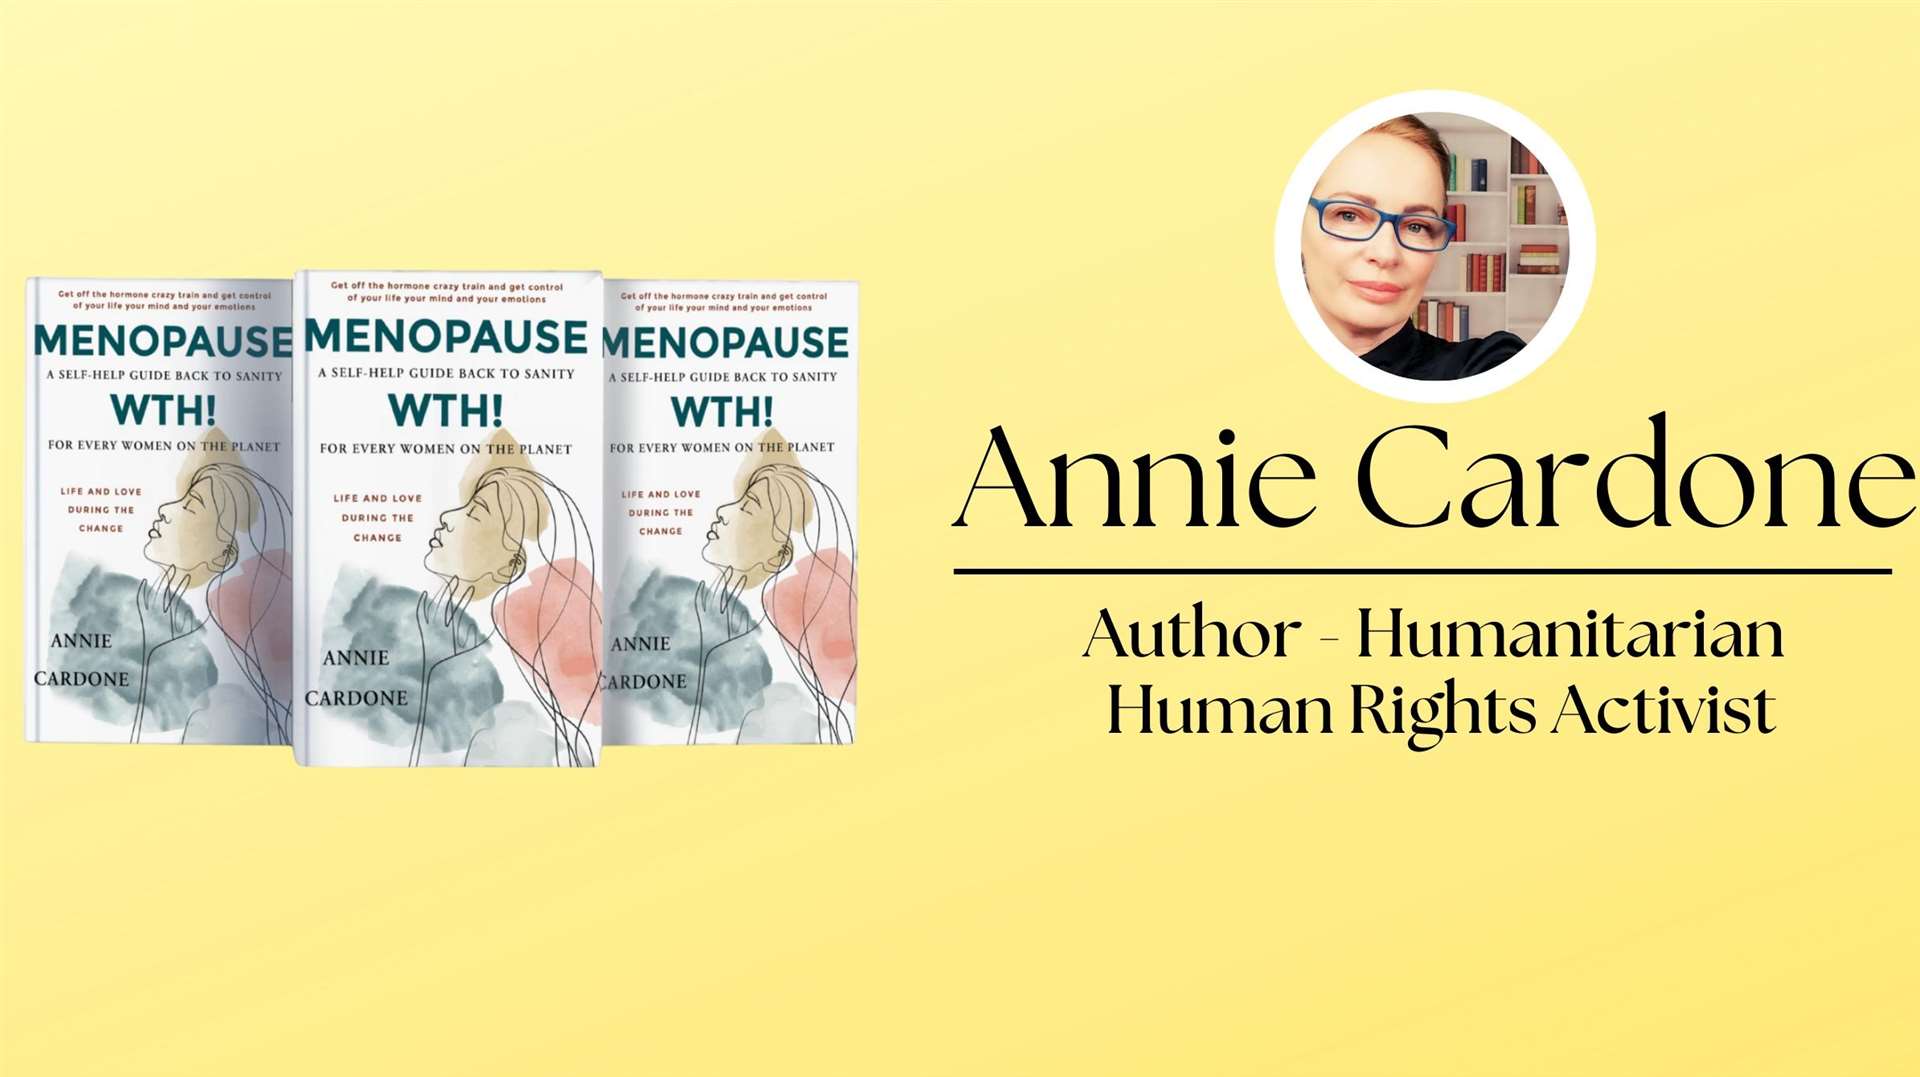 The book Menopause WTH! will be released in the next few weeks